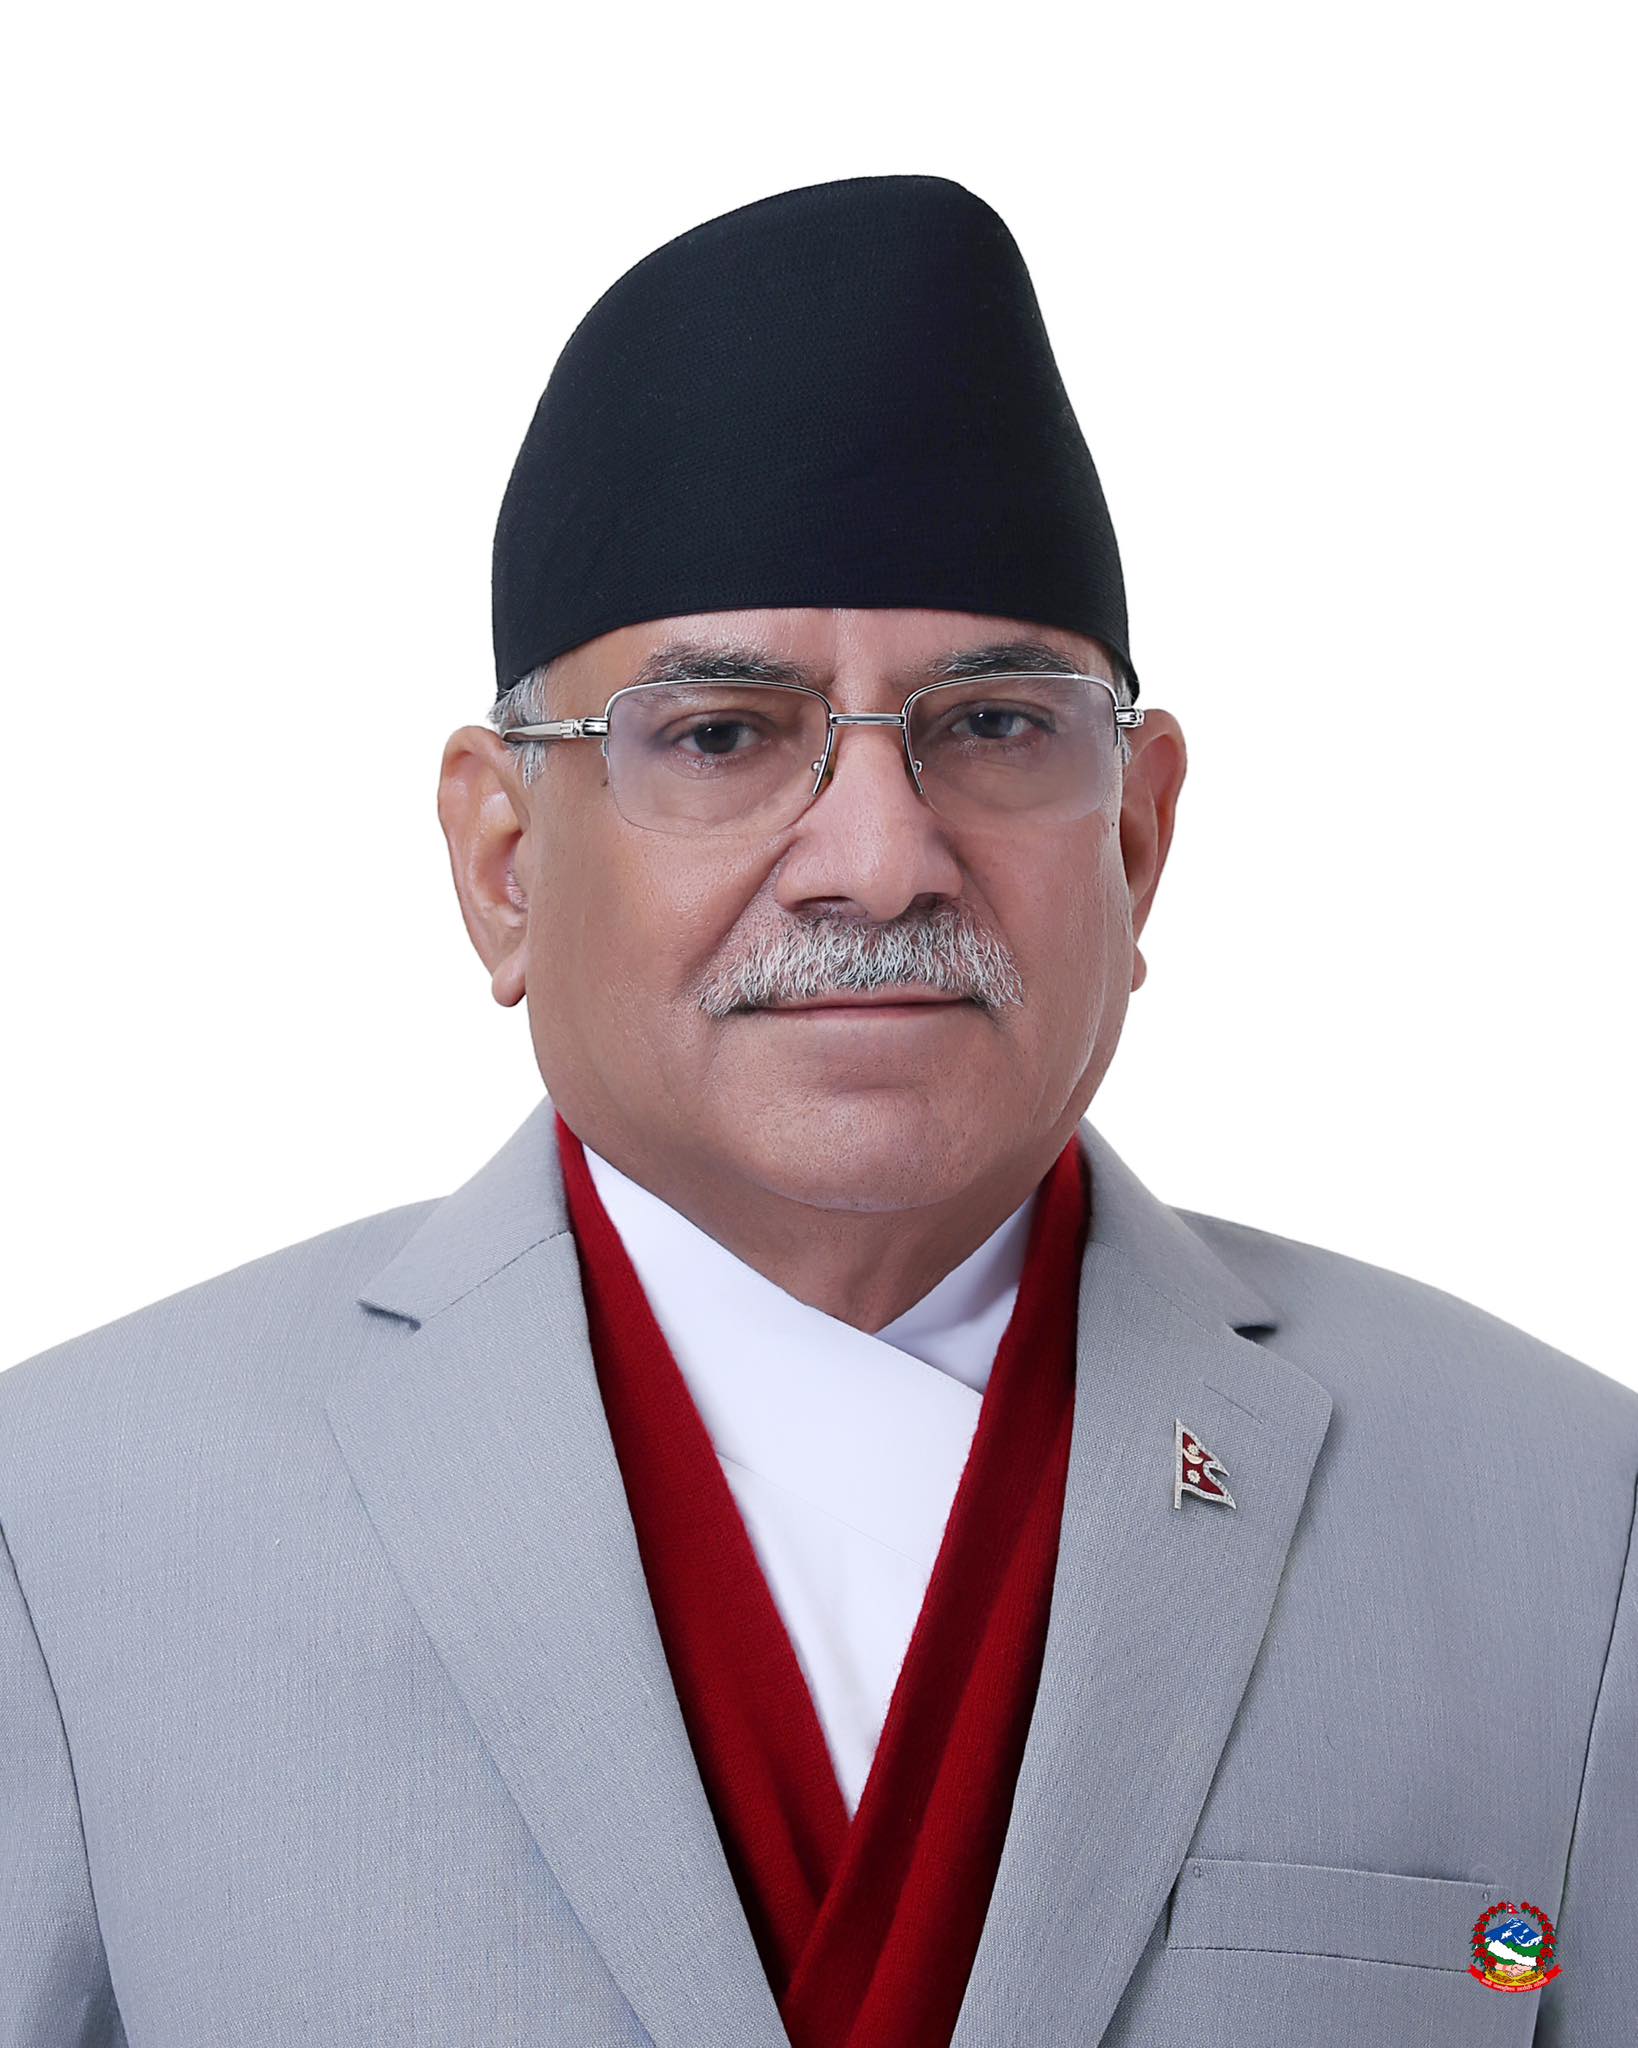 PM Dahal starts foreign visit from Qatar, leaving for Doha on March 3